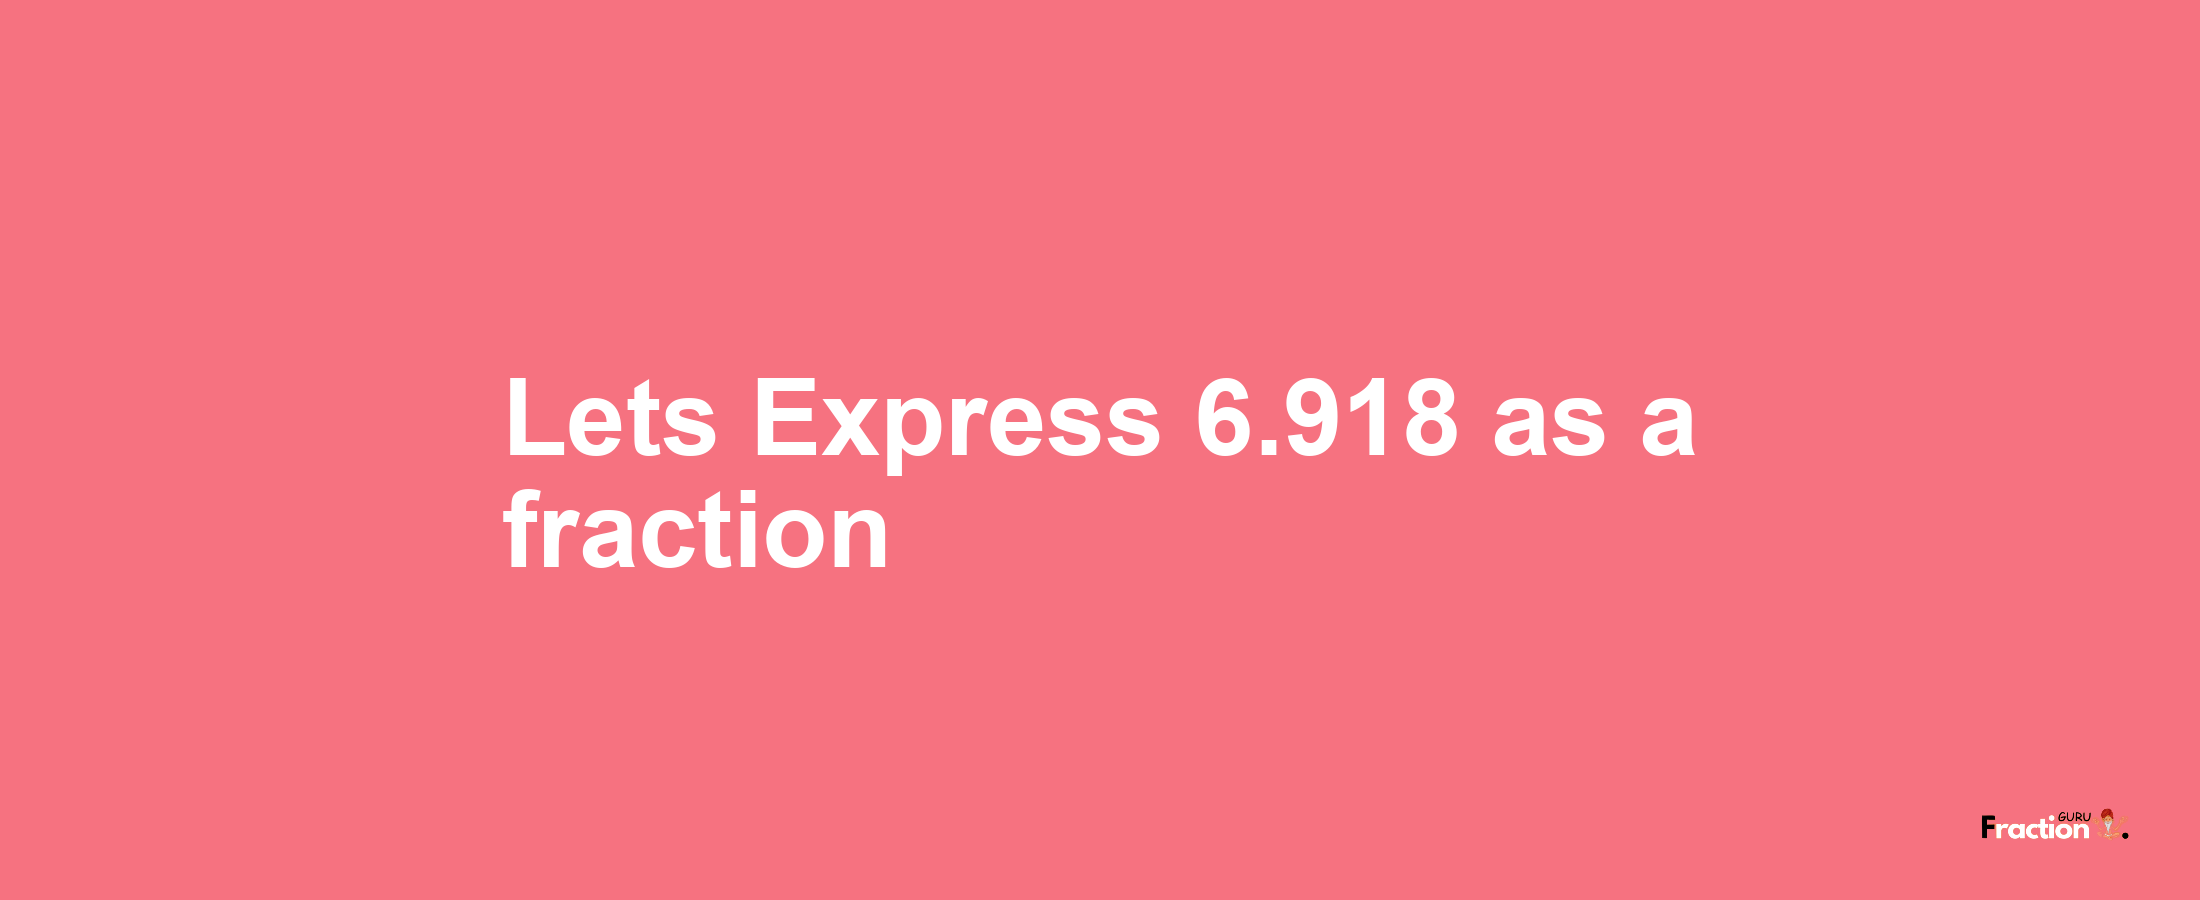 Lets Express 6.918 as afraction